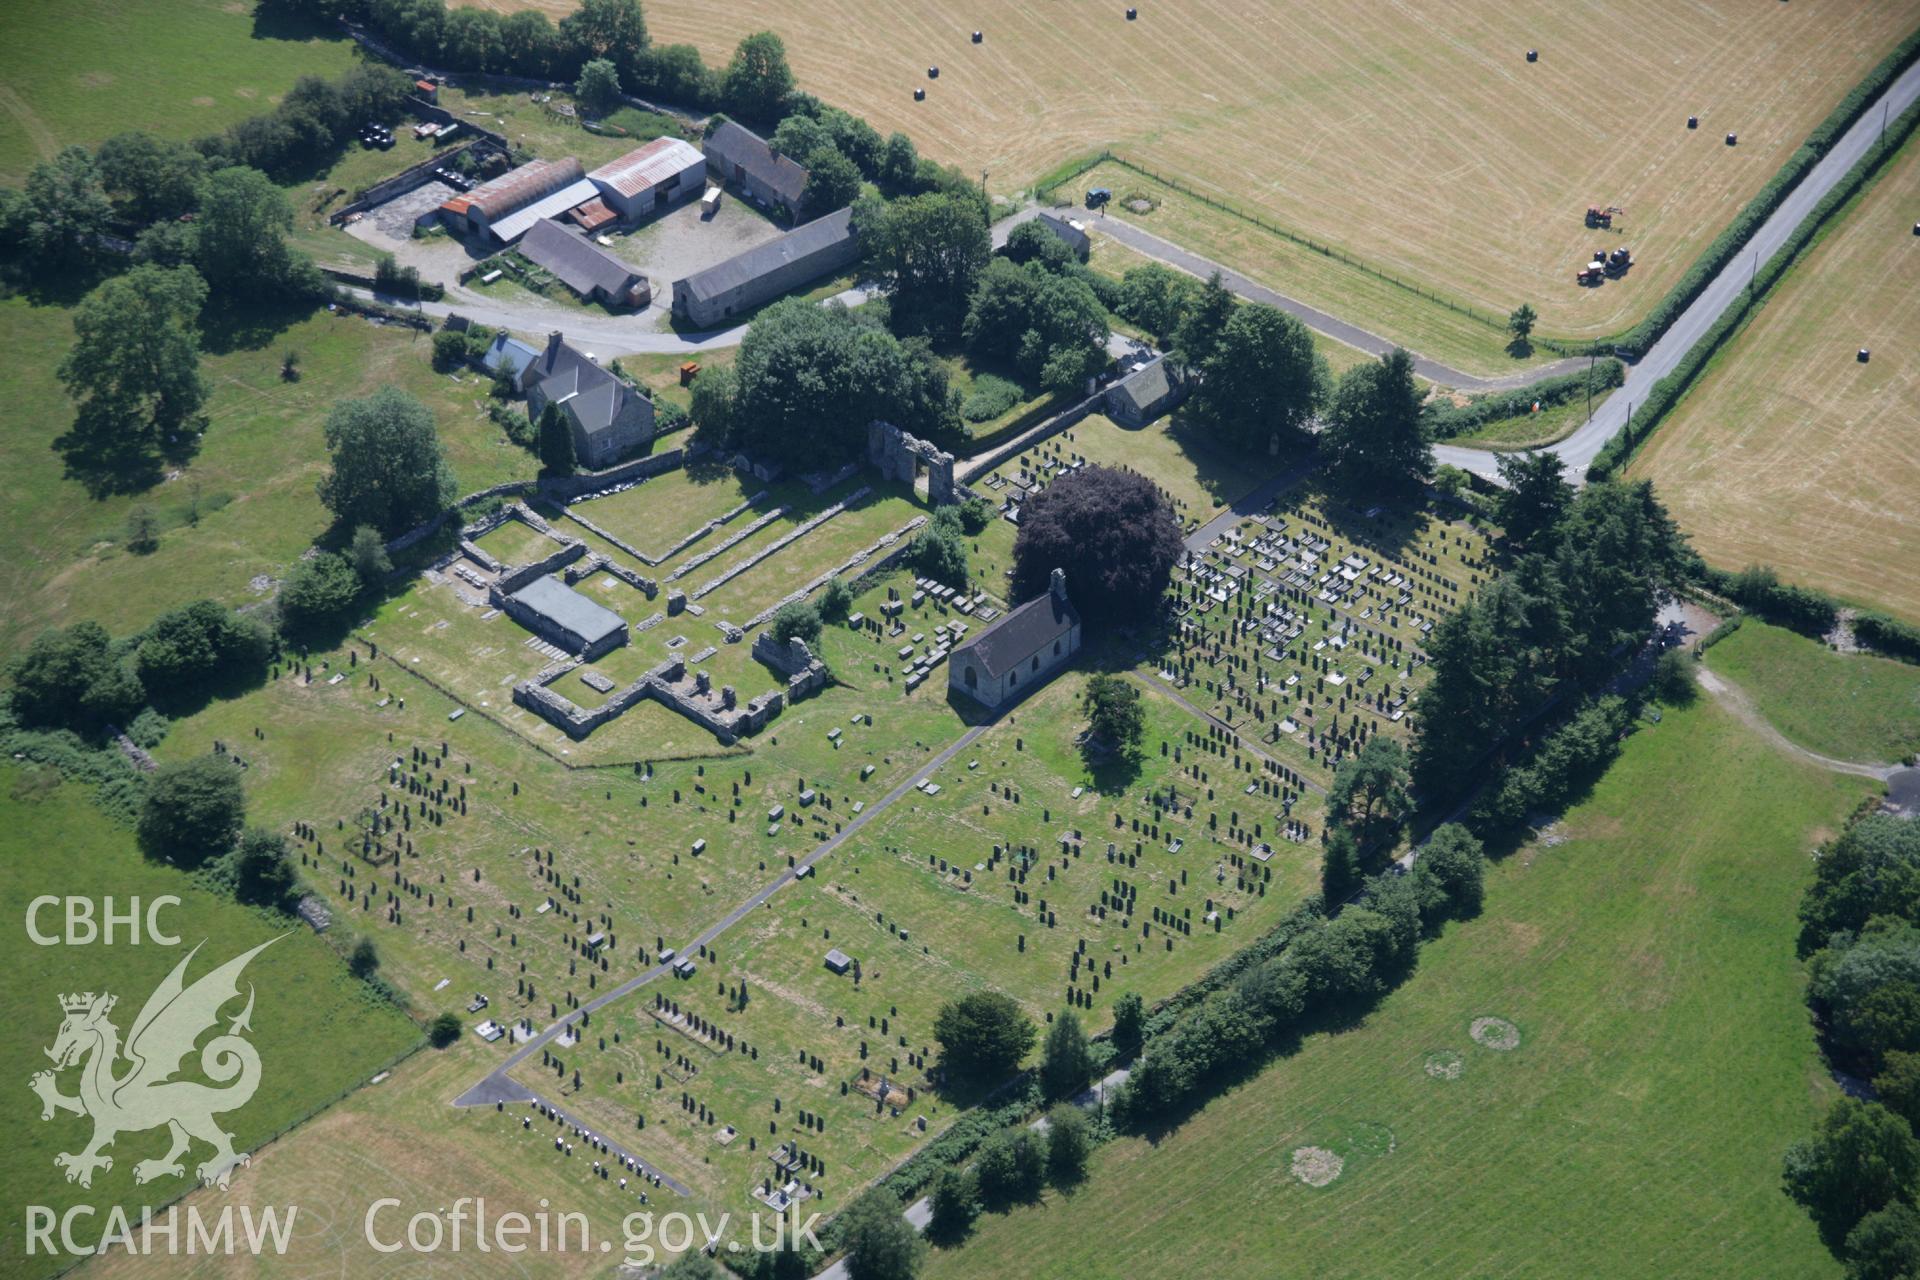 RCAHMW colour oblique aerial photograph of Strata Florida Abbey. Taken on 17 July 2006 by Toby Driver.